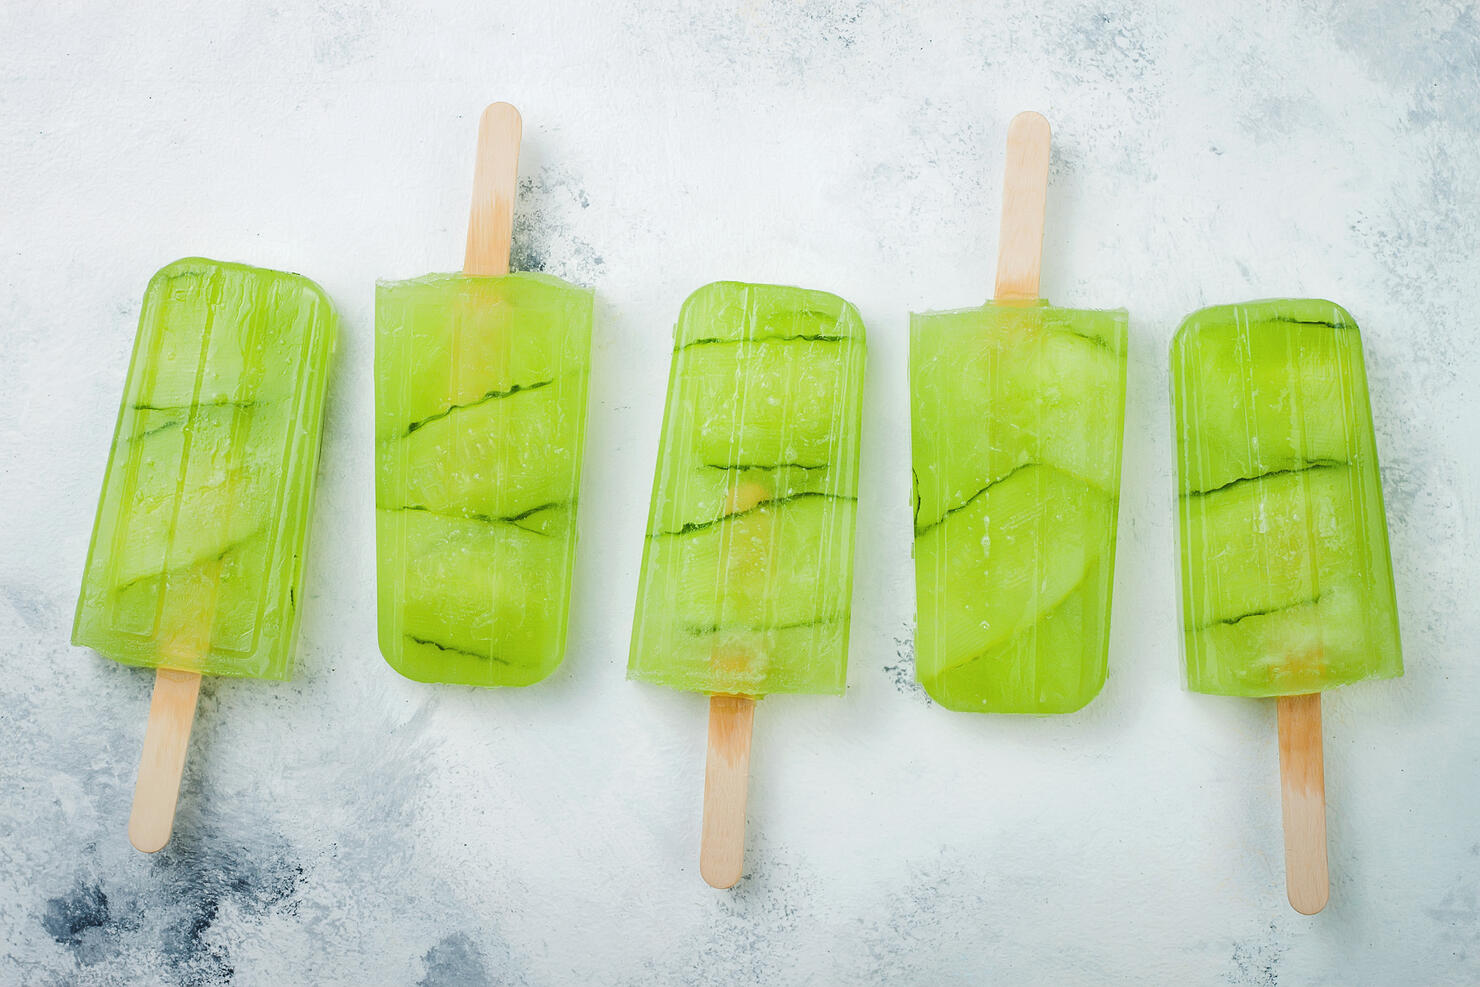 Detox cucumber lemon juice popsicles with white currant. Top view, overhead.